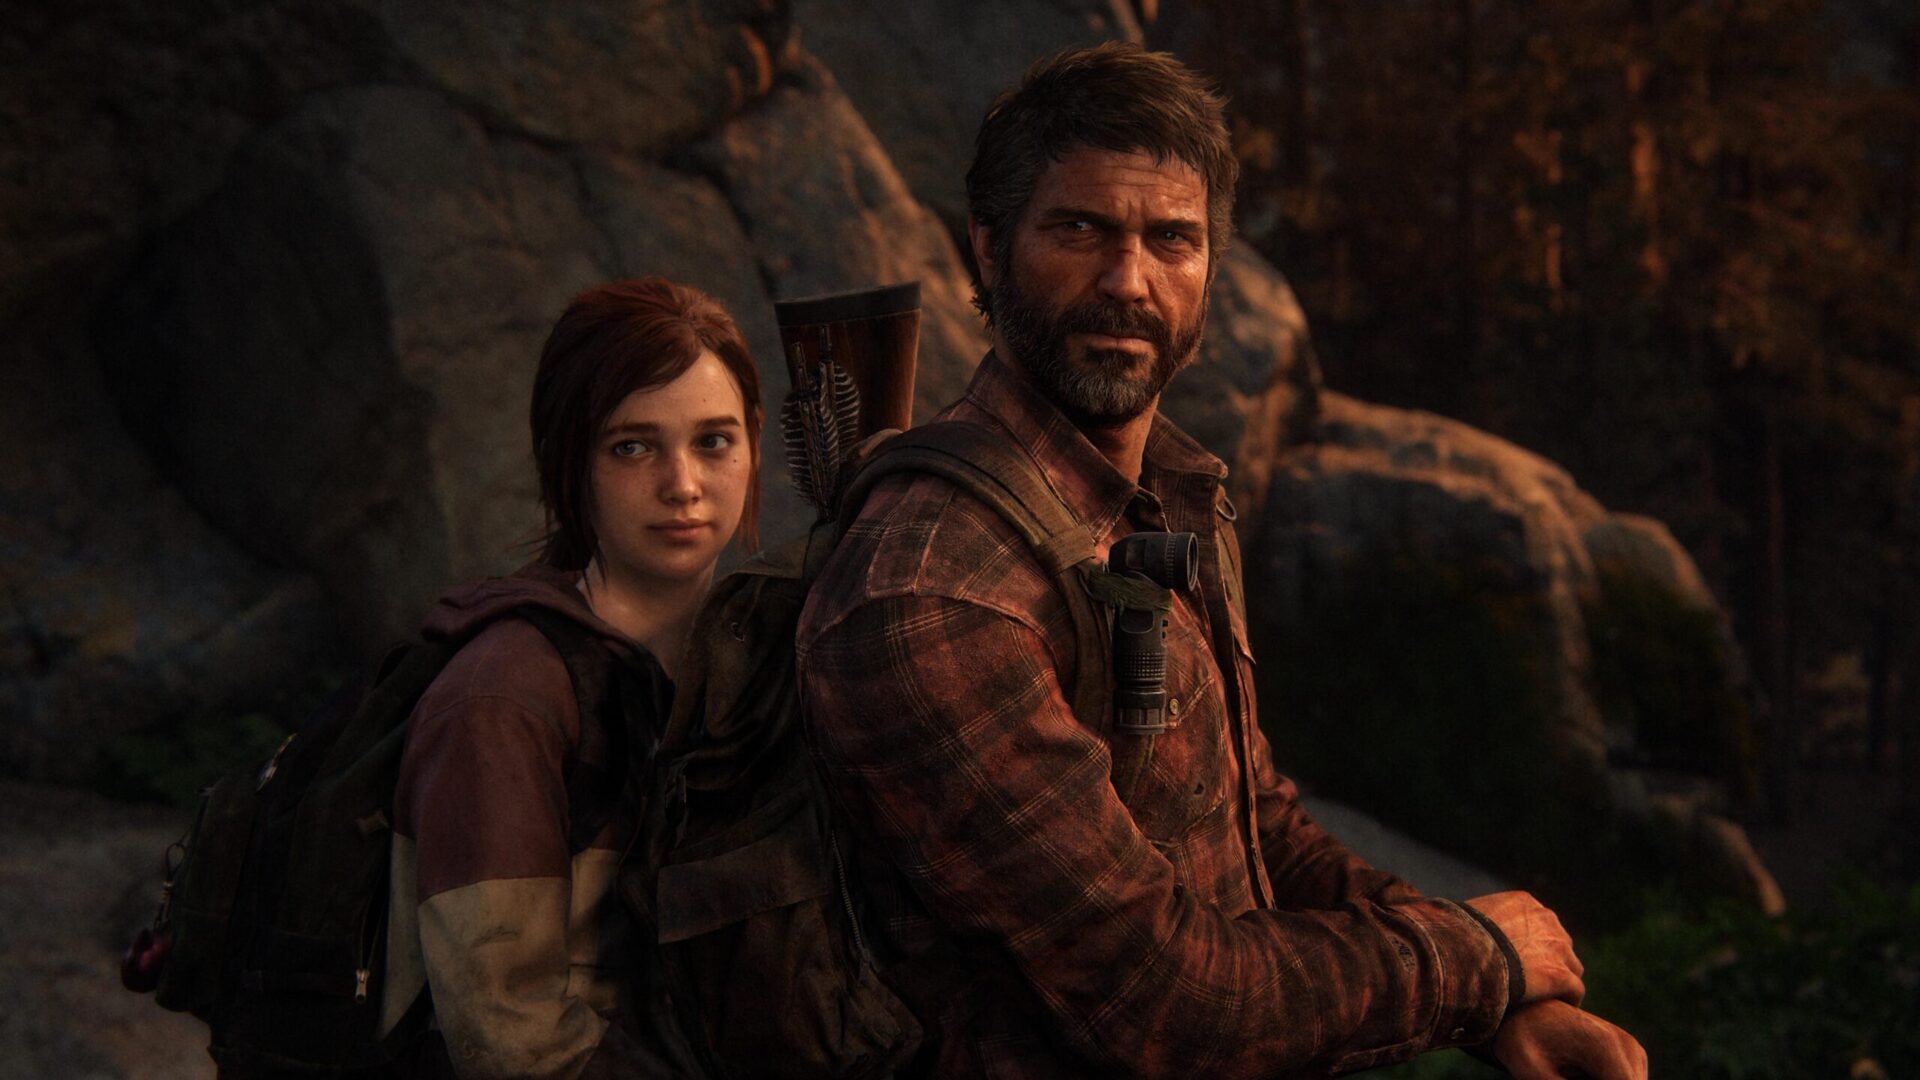 The Last of Us Part 1 on PC Gets Huge 25GB Patch But Naughty Dog Still  Isn't Done - IGN